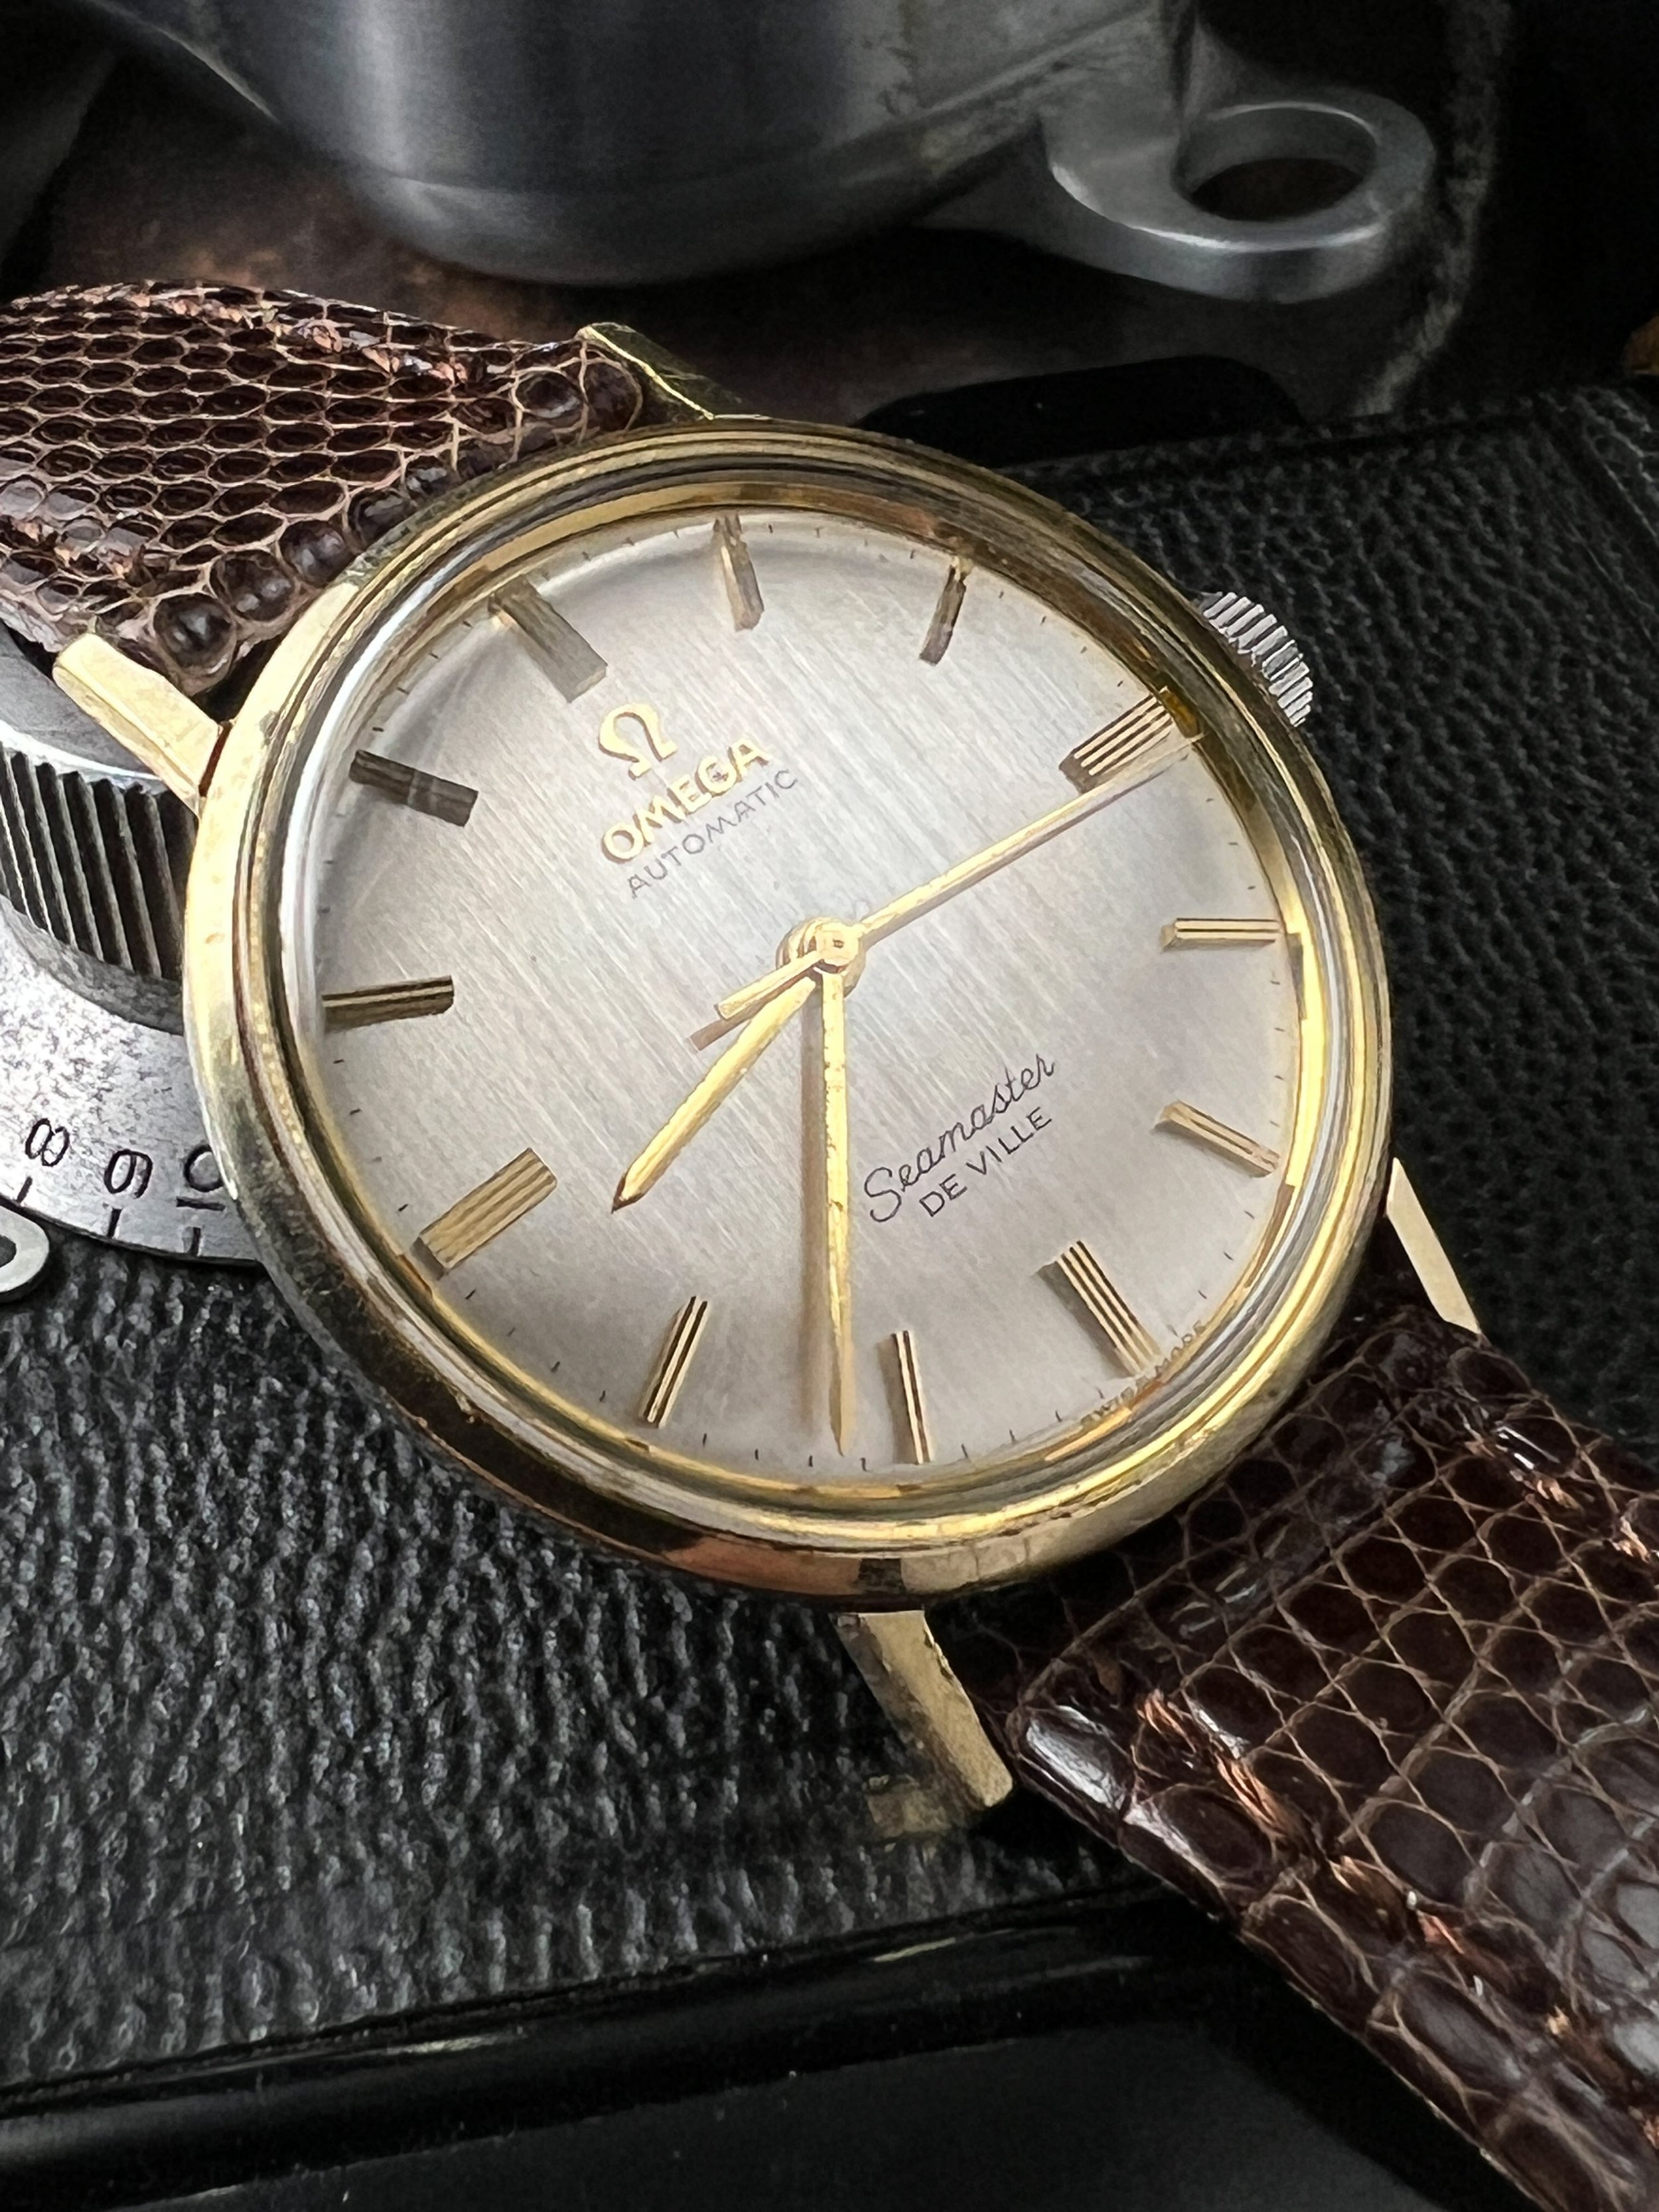 Mid 60's Omega Seamaster DeVille — Cool Vintage Watches